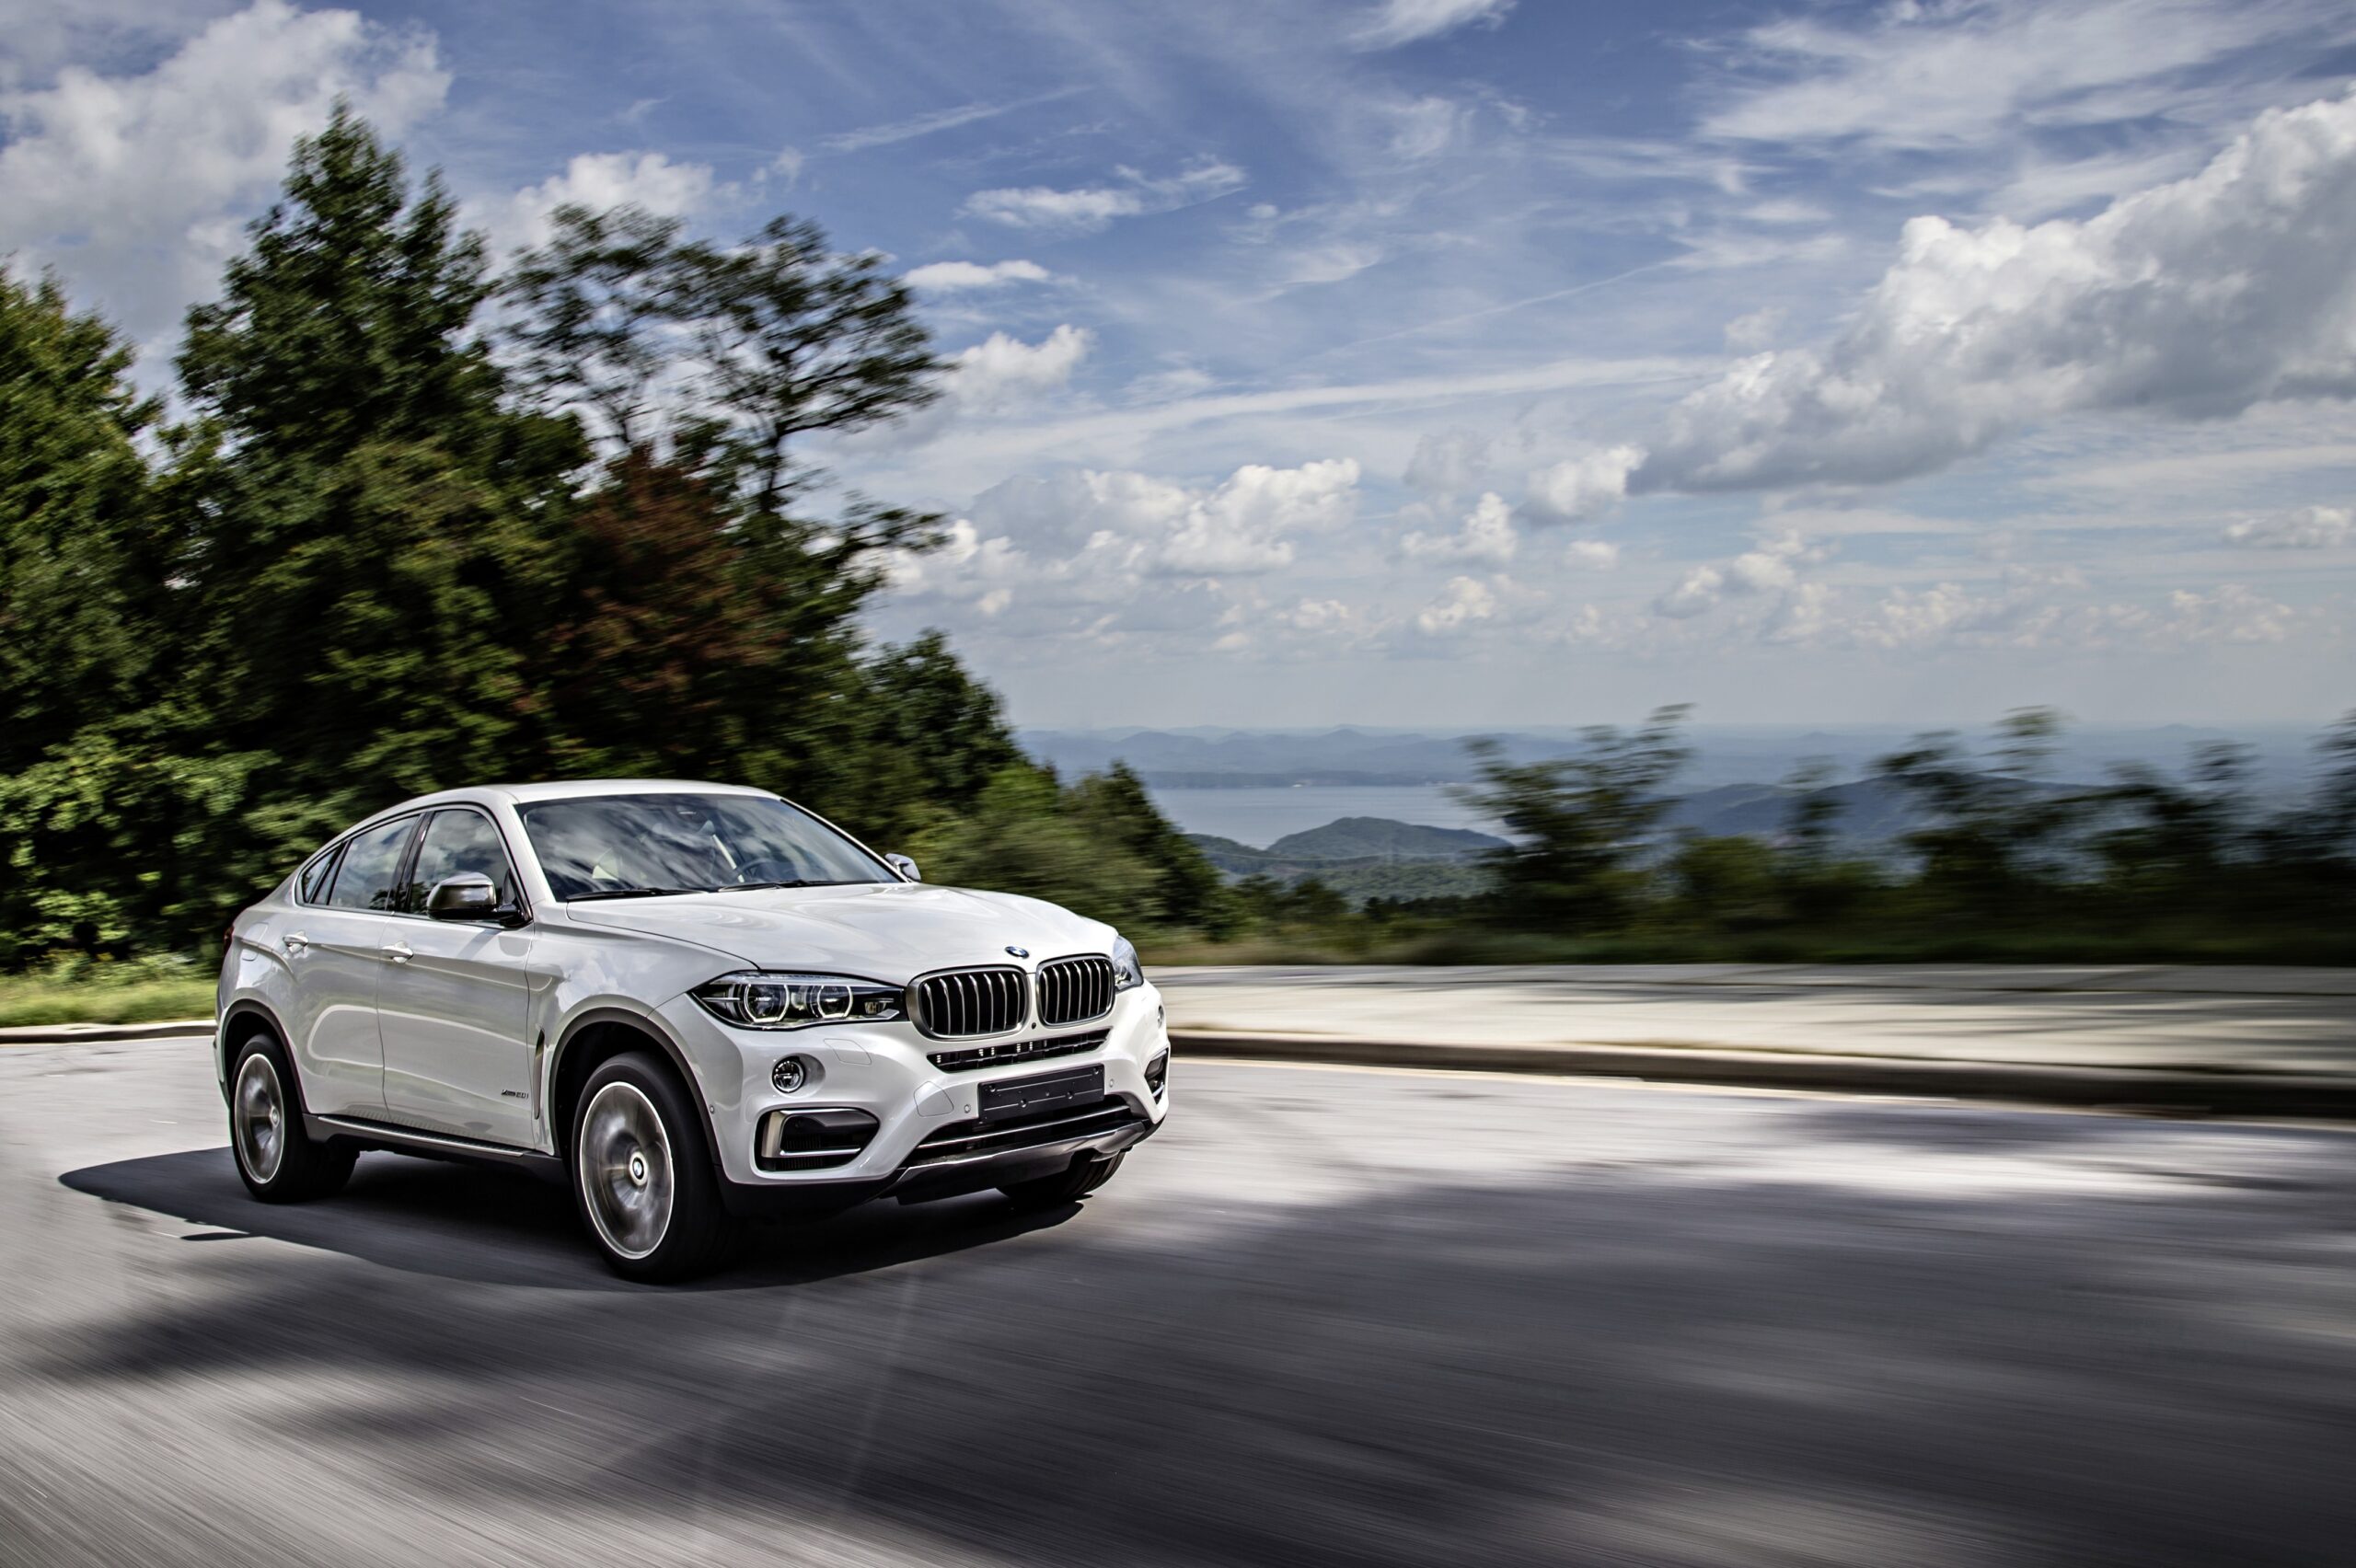 Driven: 2015 BMW X6. An Uncompromising Compromise.